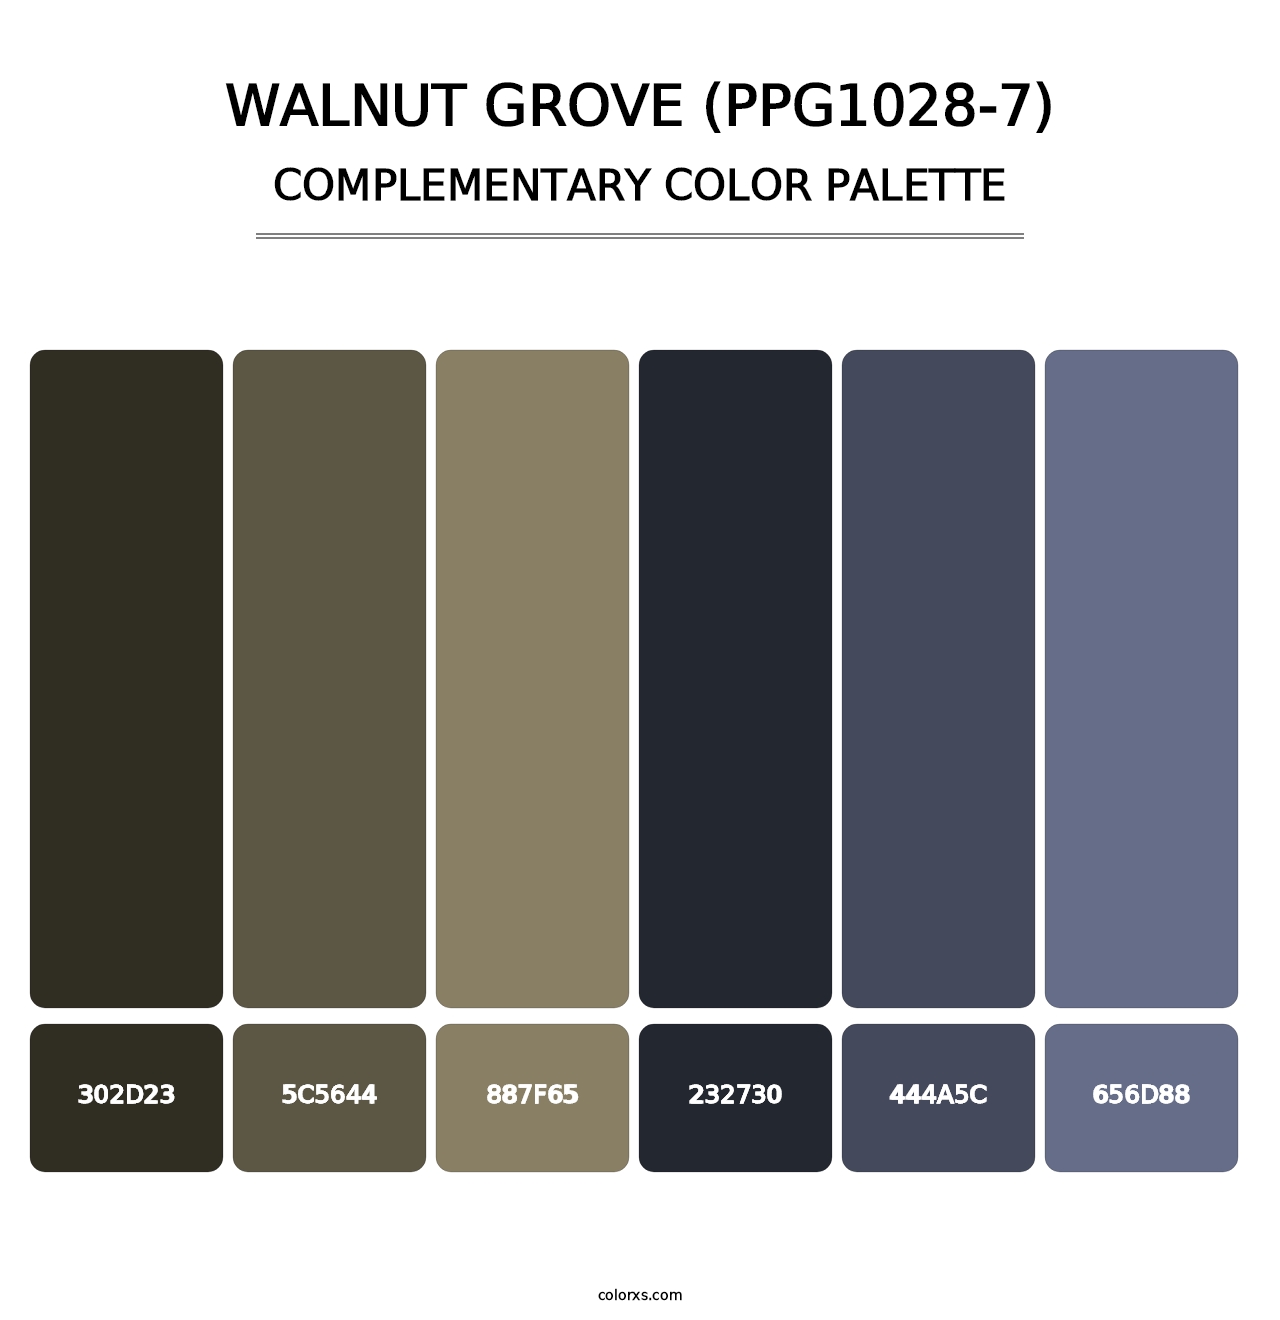 Walnut Grove (PPG1028-7) - Complementary Color Palette